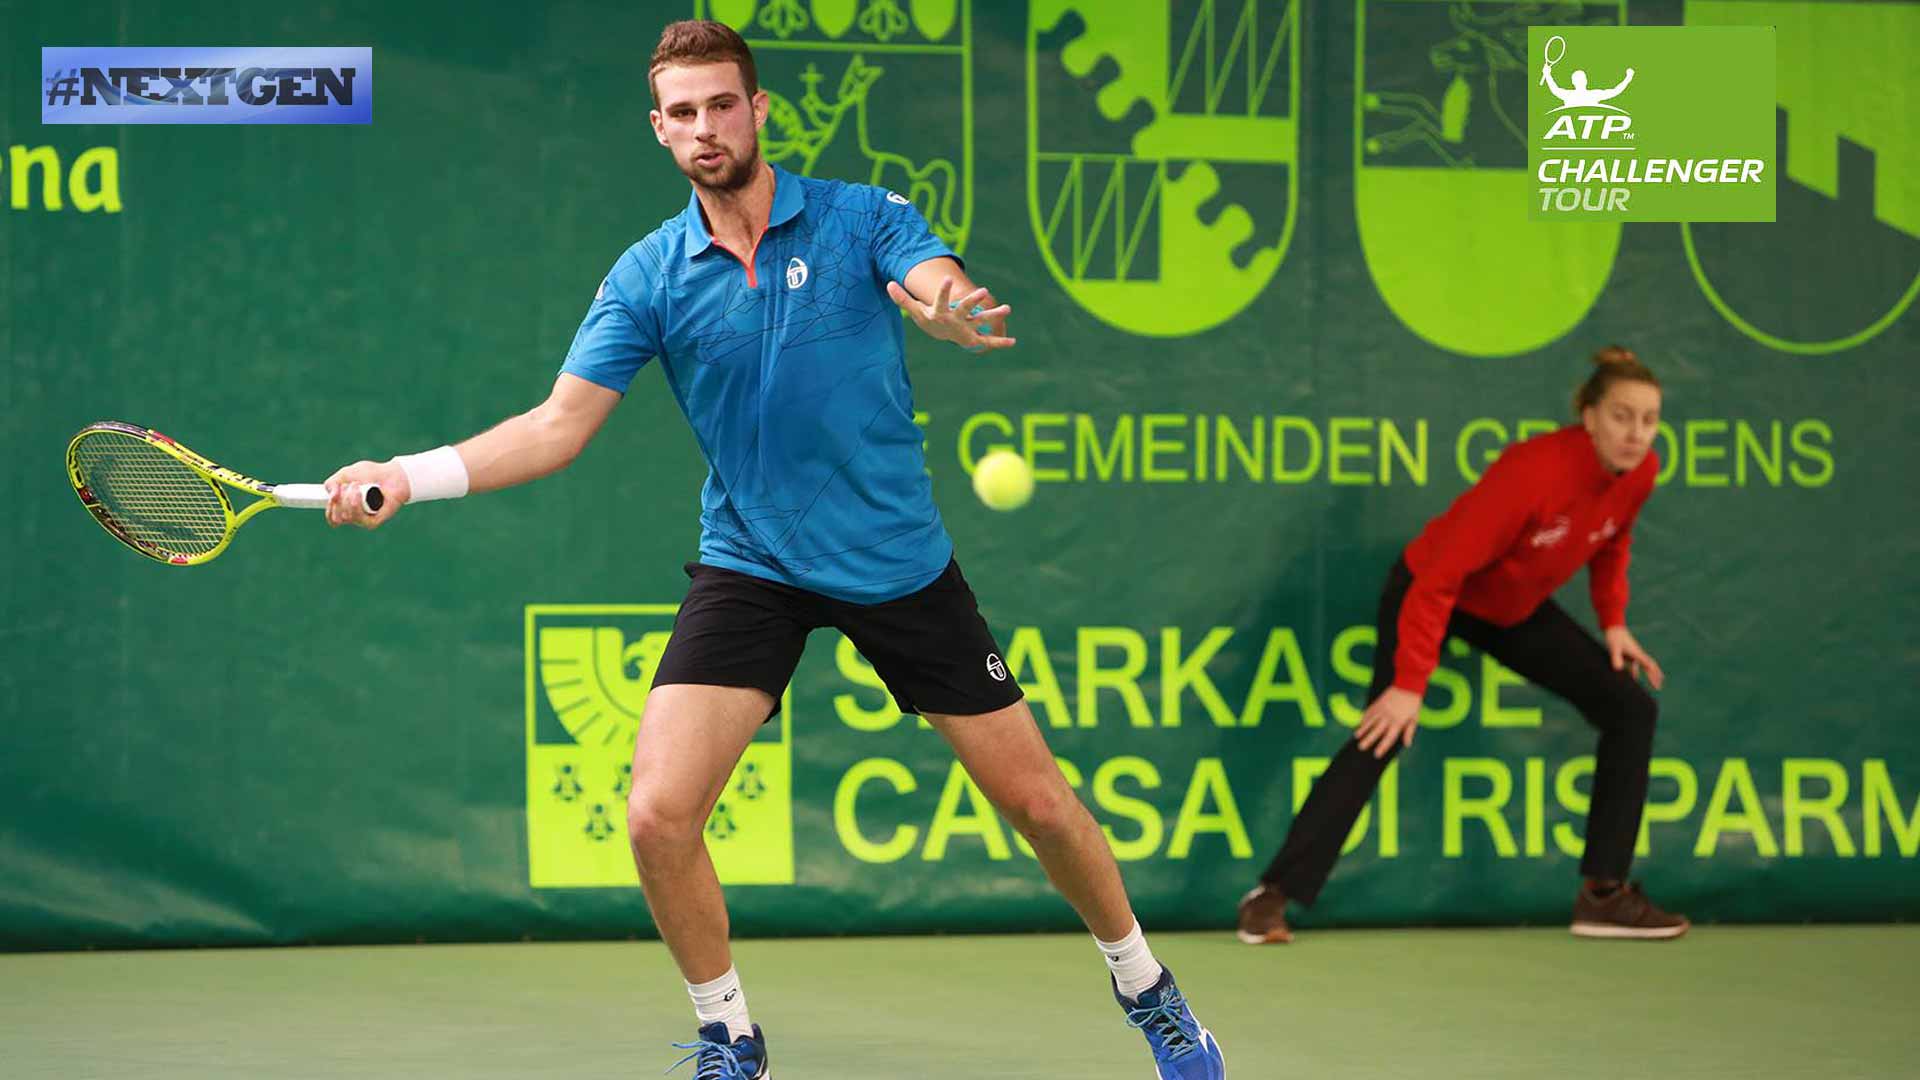 Stefano Napolitano is producing his best tennis on the ATP Challenger Tour.